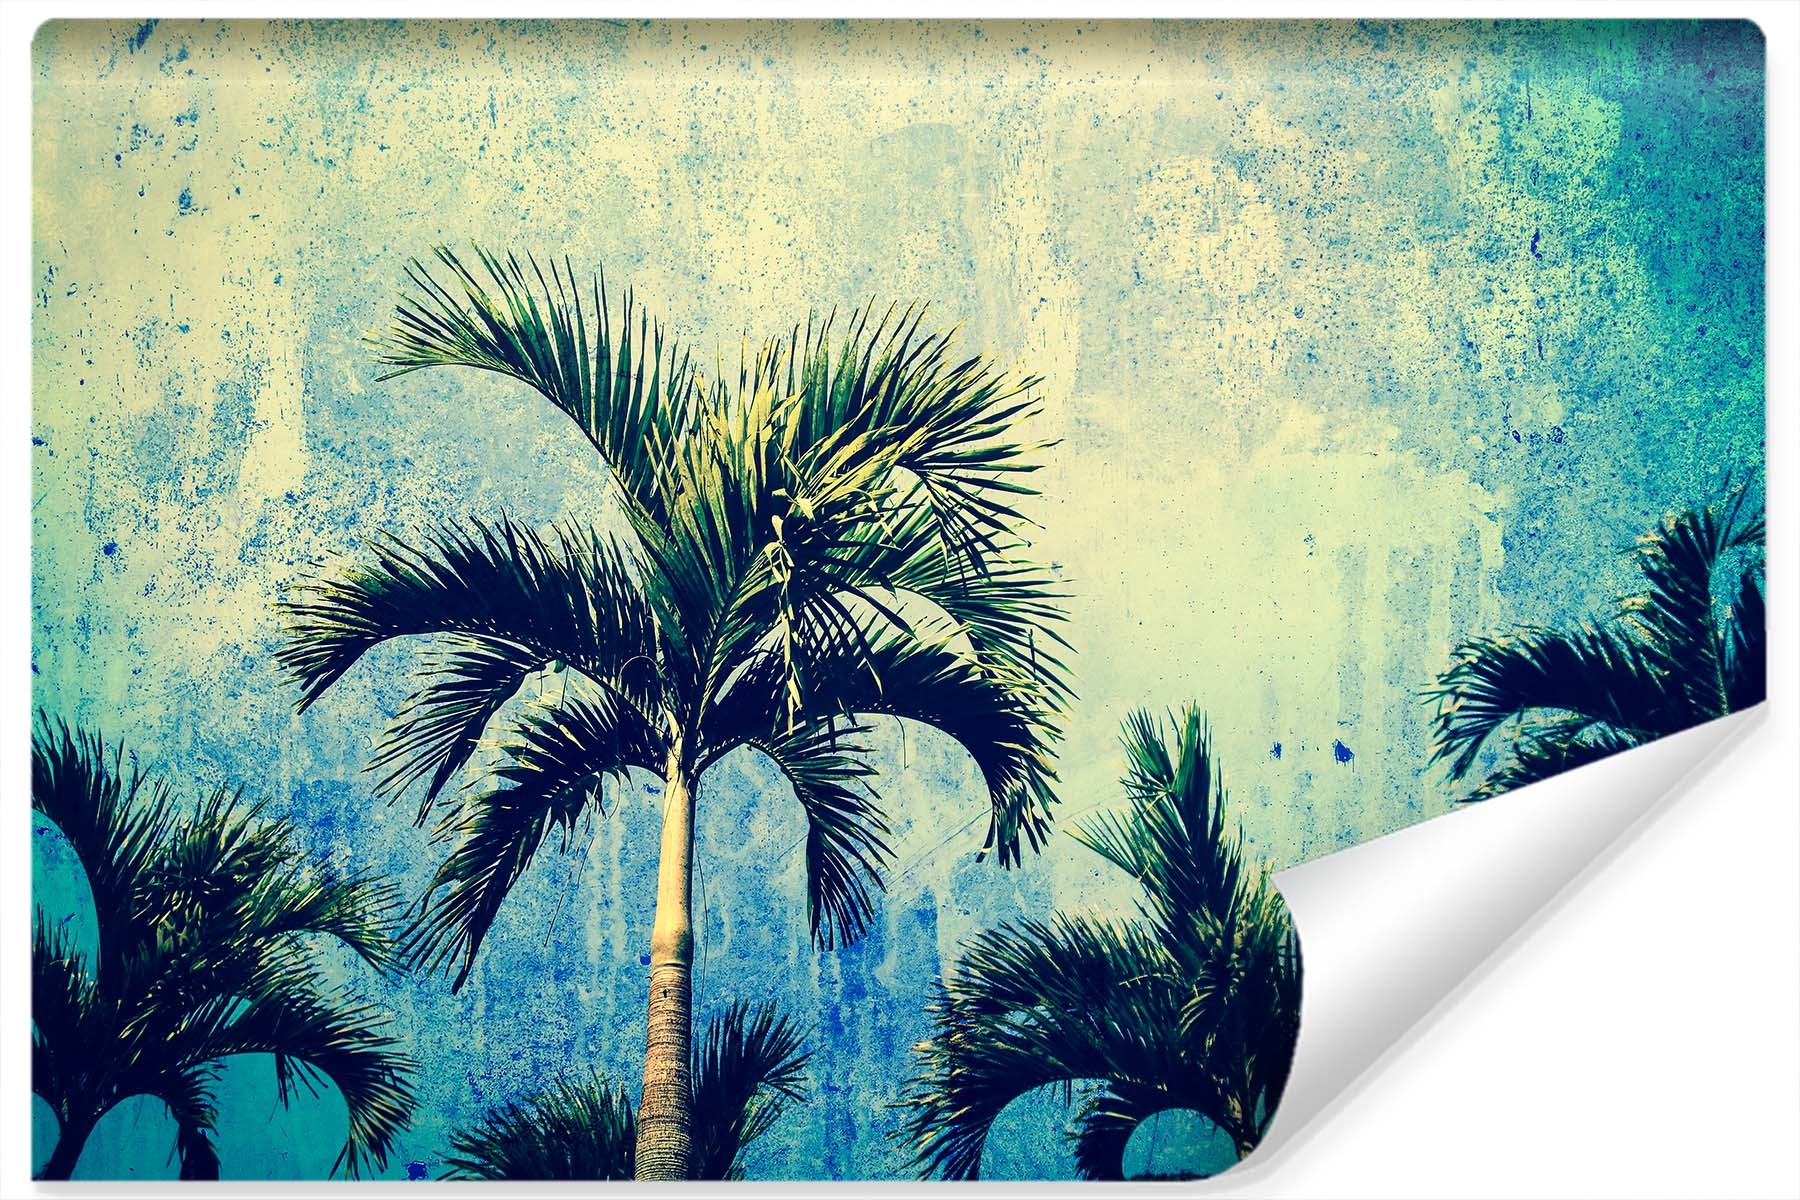 Photo wallpaper Palm trees in grunge style Non-woven 104x70,5 cm FT-3590-VEM